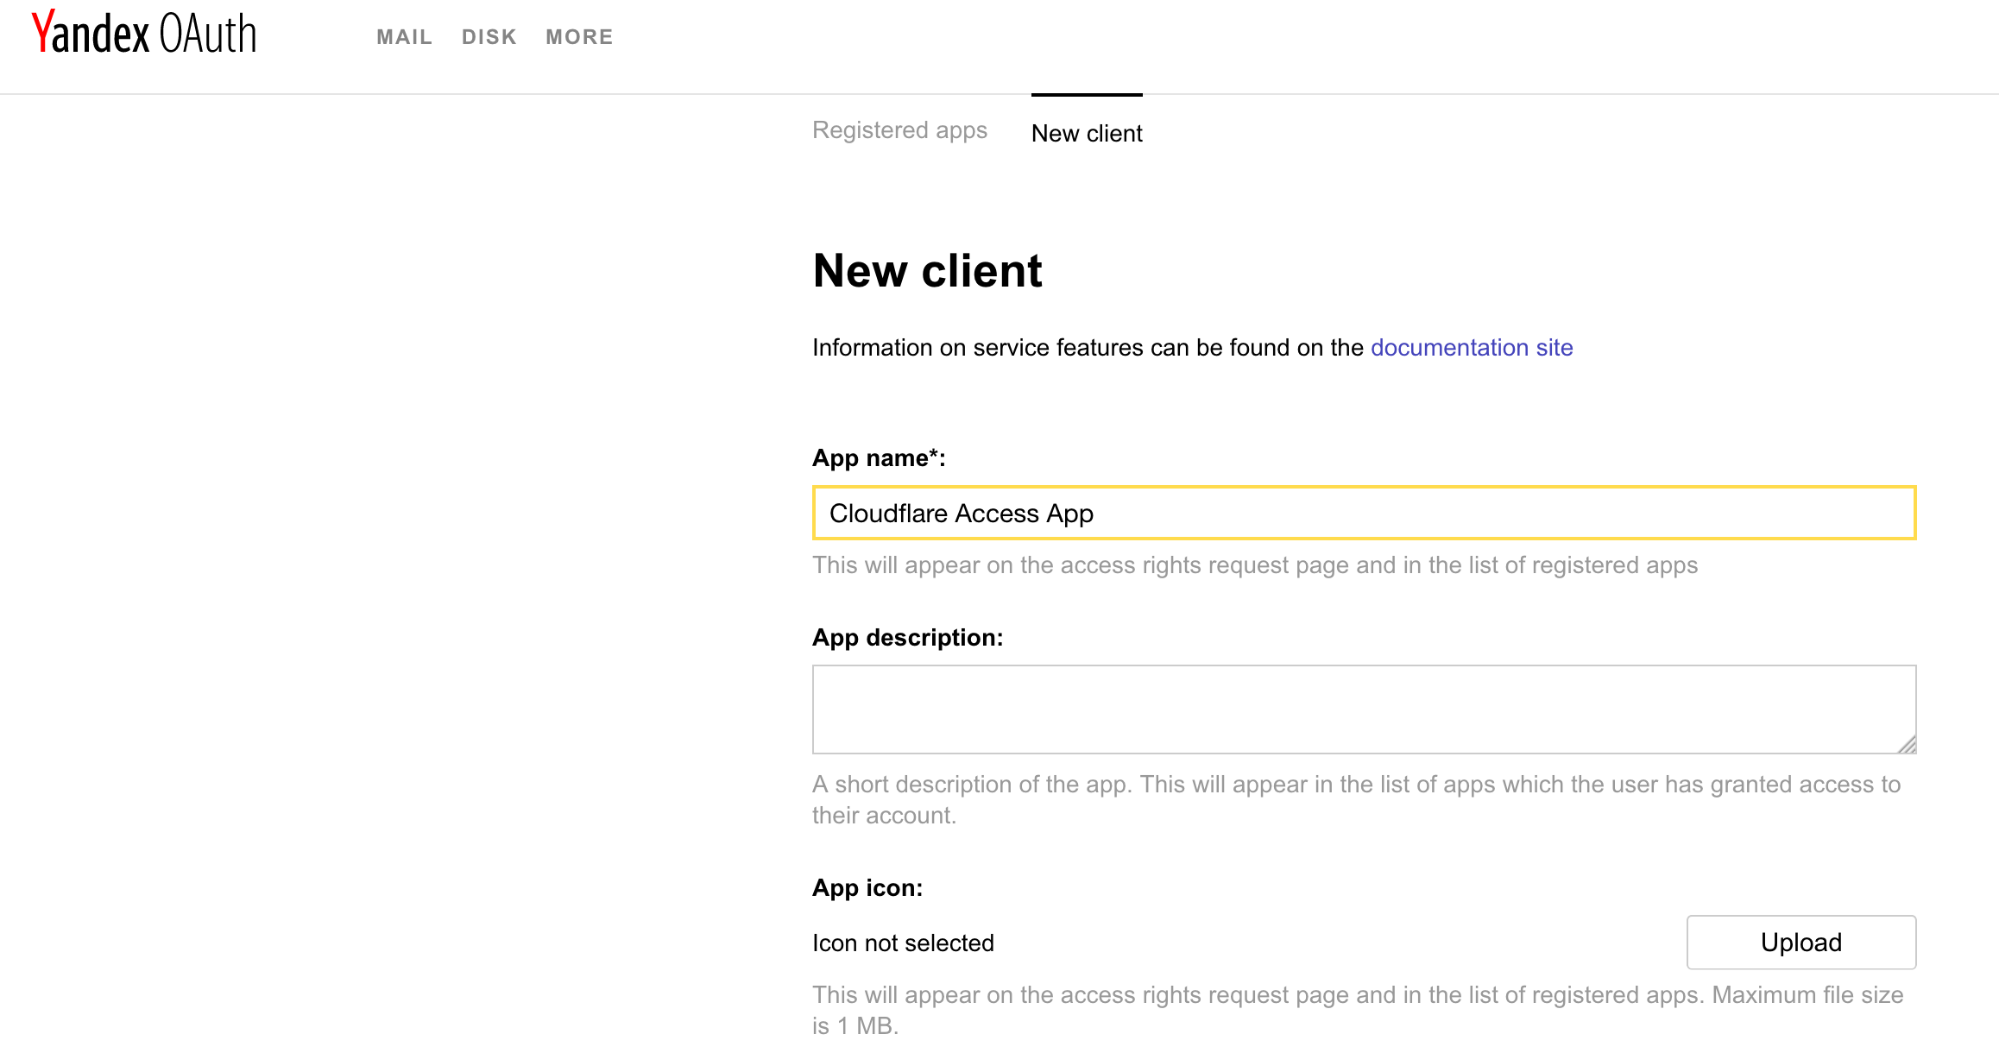 Yandex OAuth page